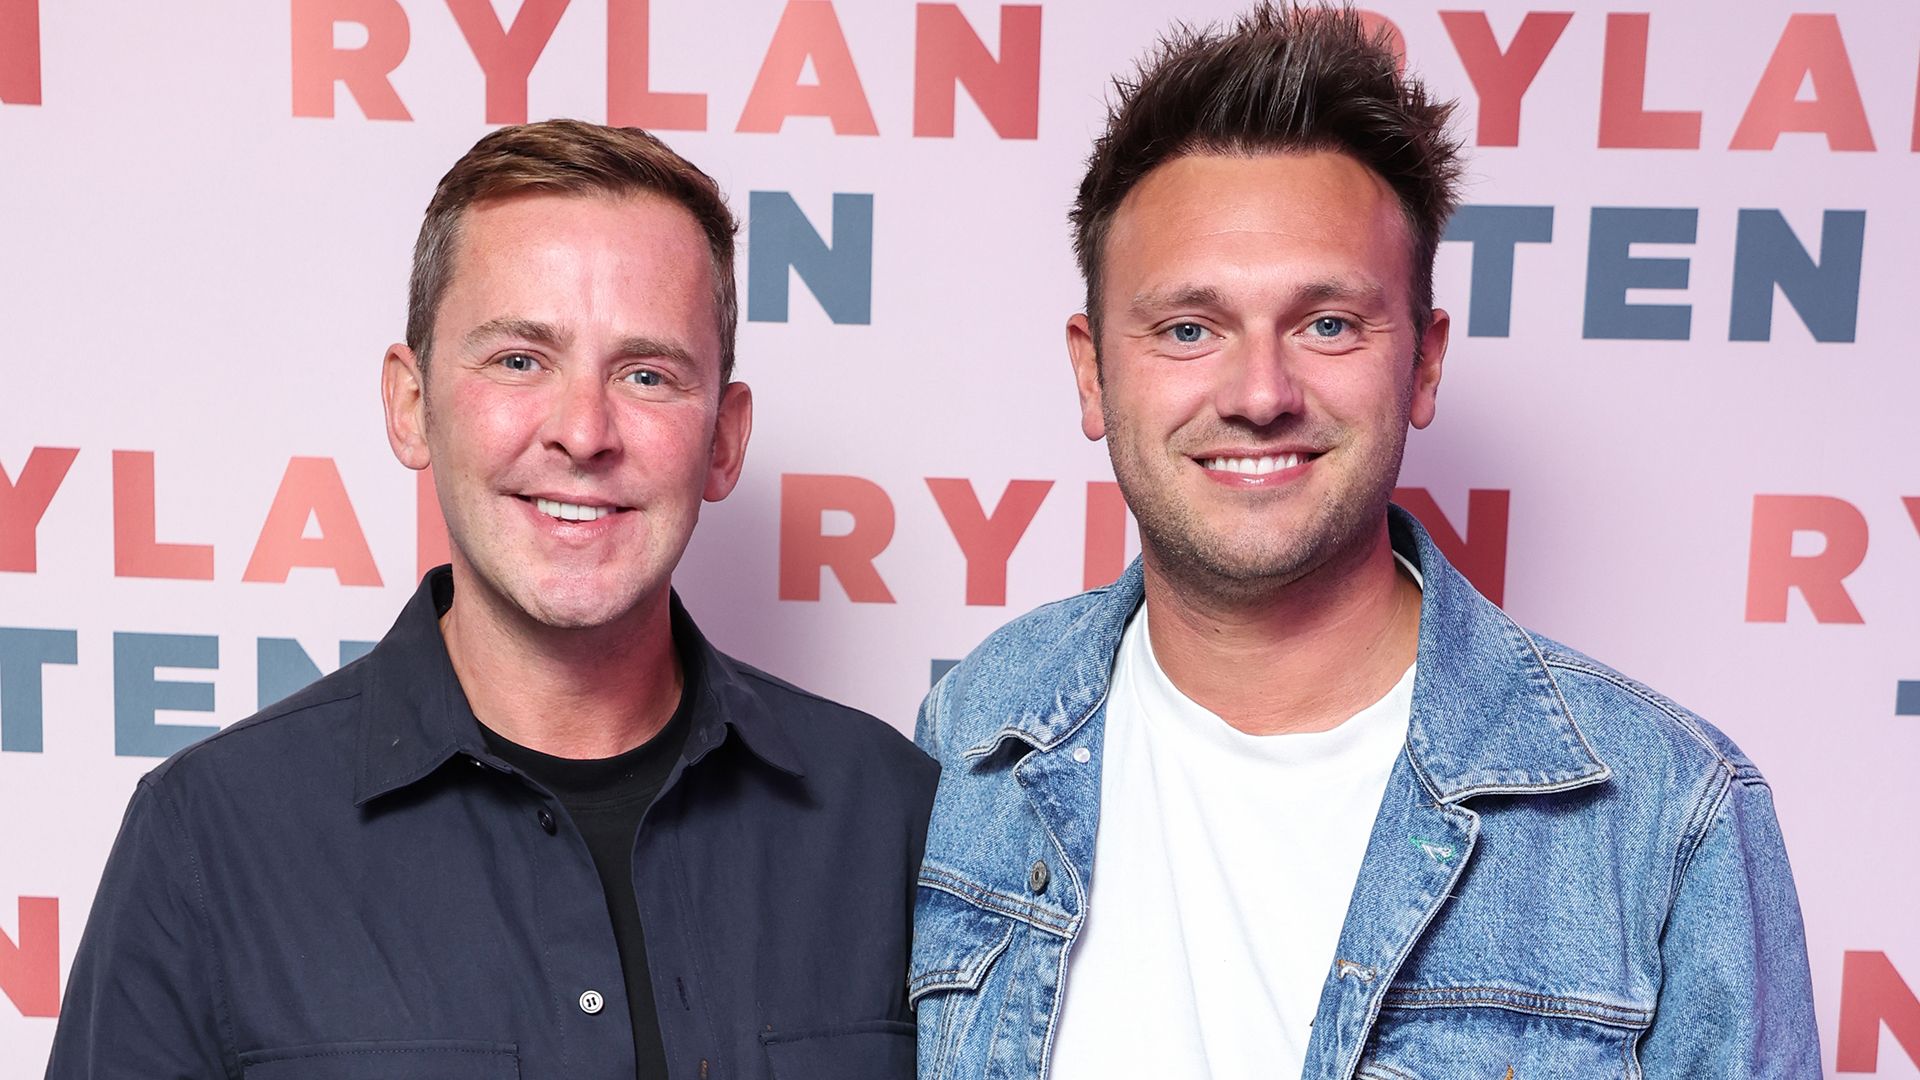 Scott Mills and Sam Vaughan at the Rylan book launch